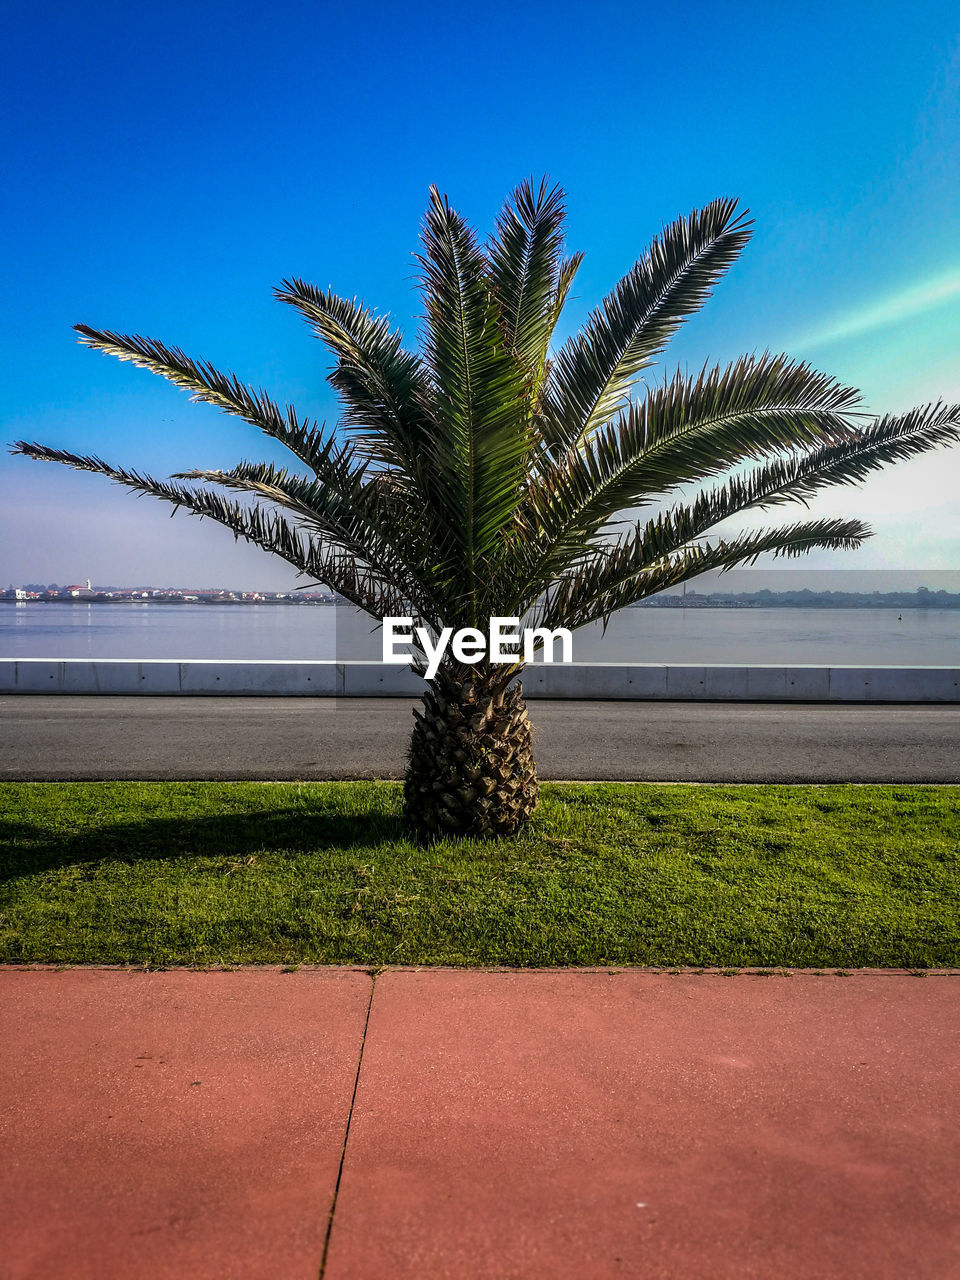 PALM TREES BY SEA AGAINST BLUE SKY